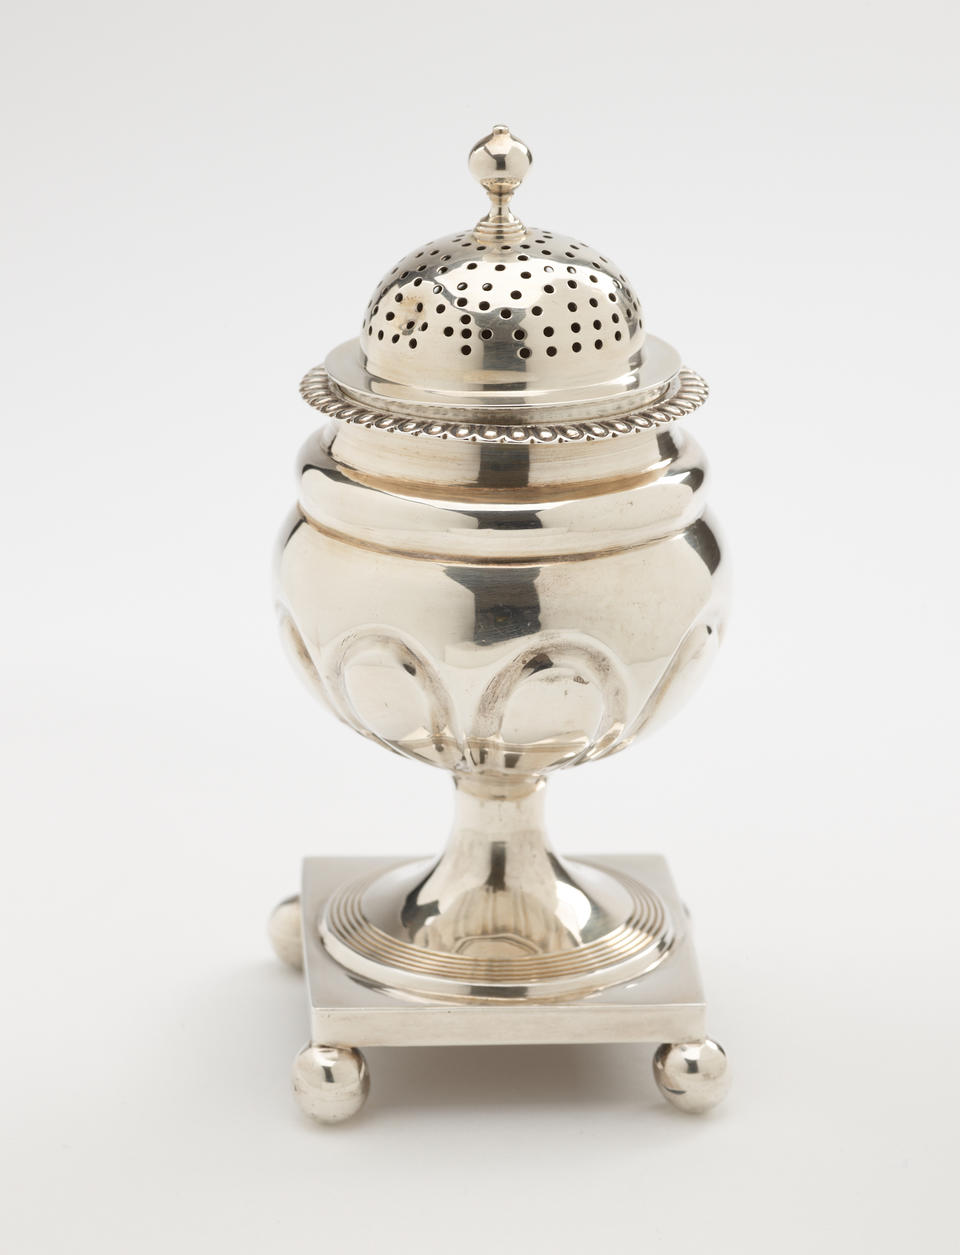 A silver caster with a square foot with small balls in each corner, the lid is perforated. 